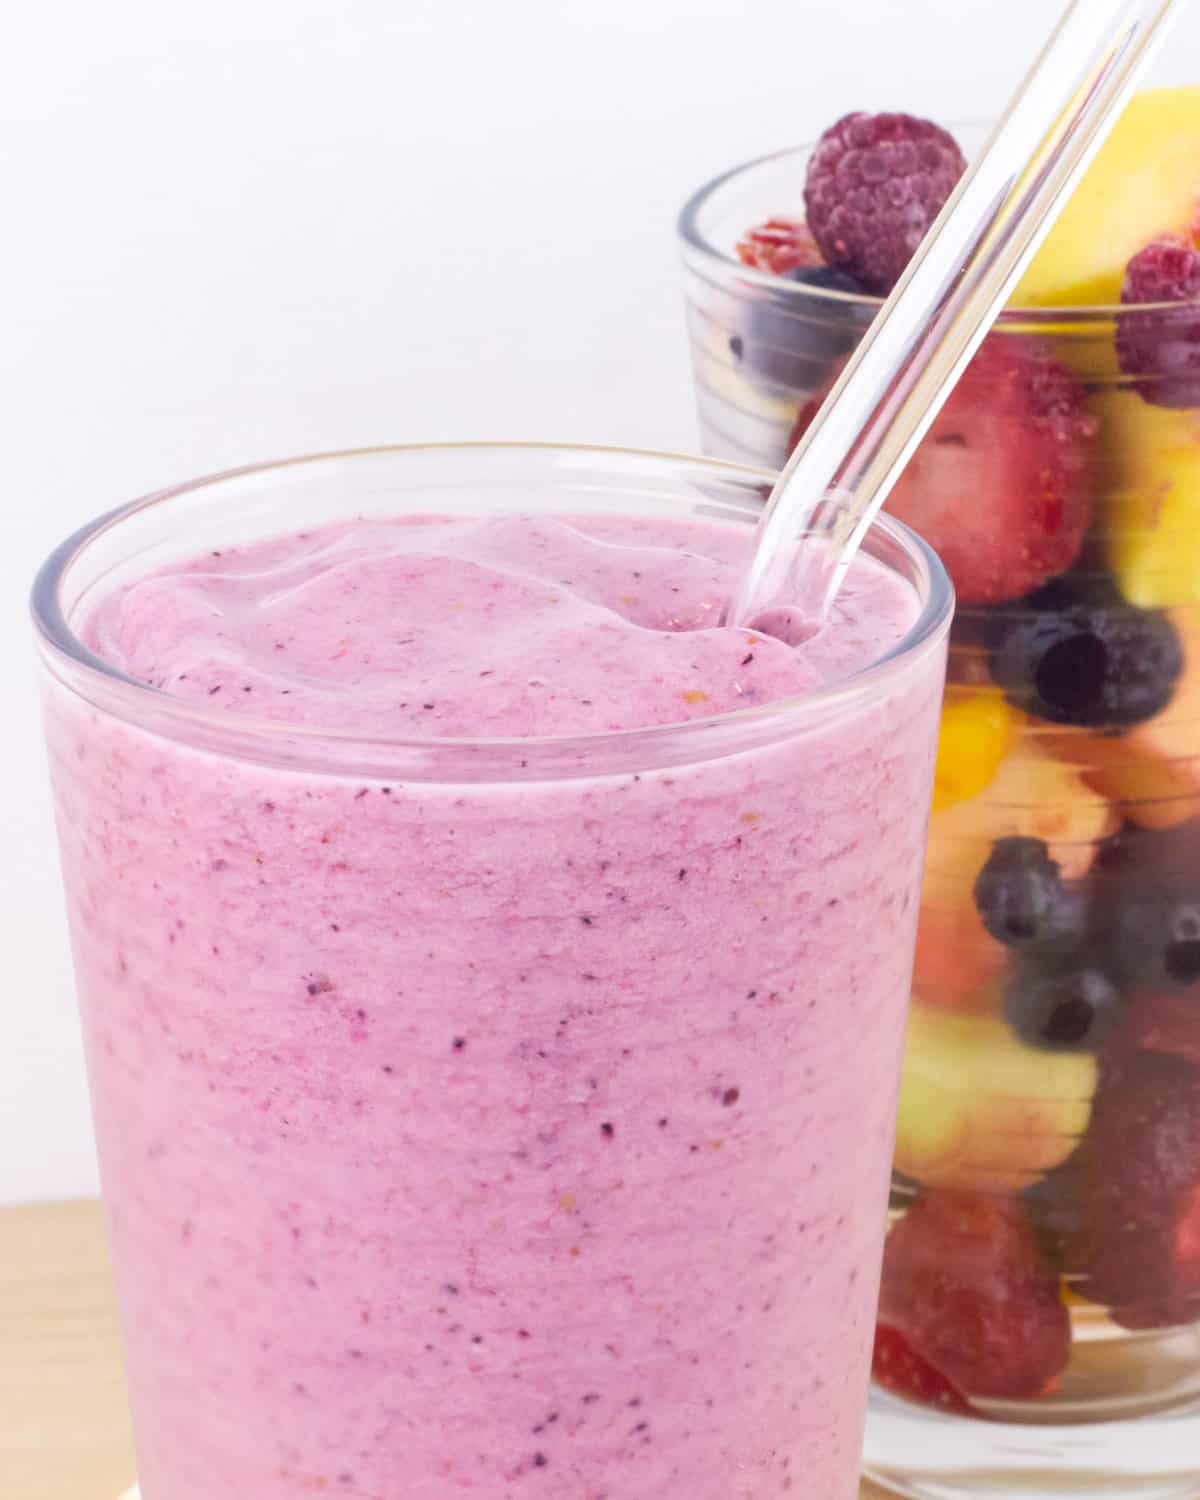 A close up picture of a smoothie with a glass straw.